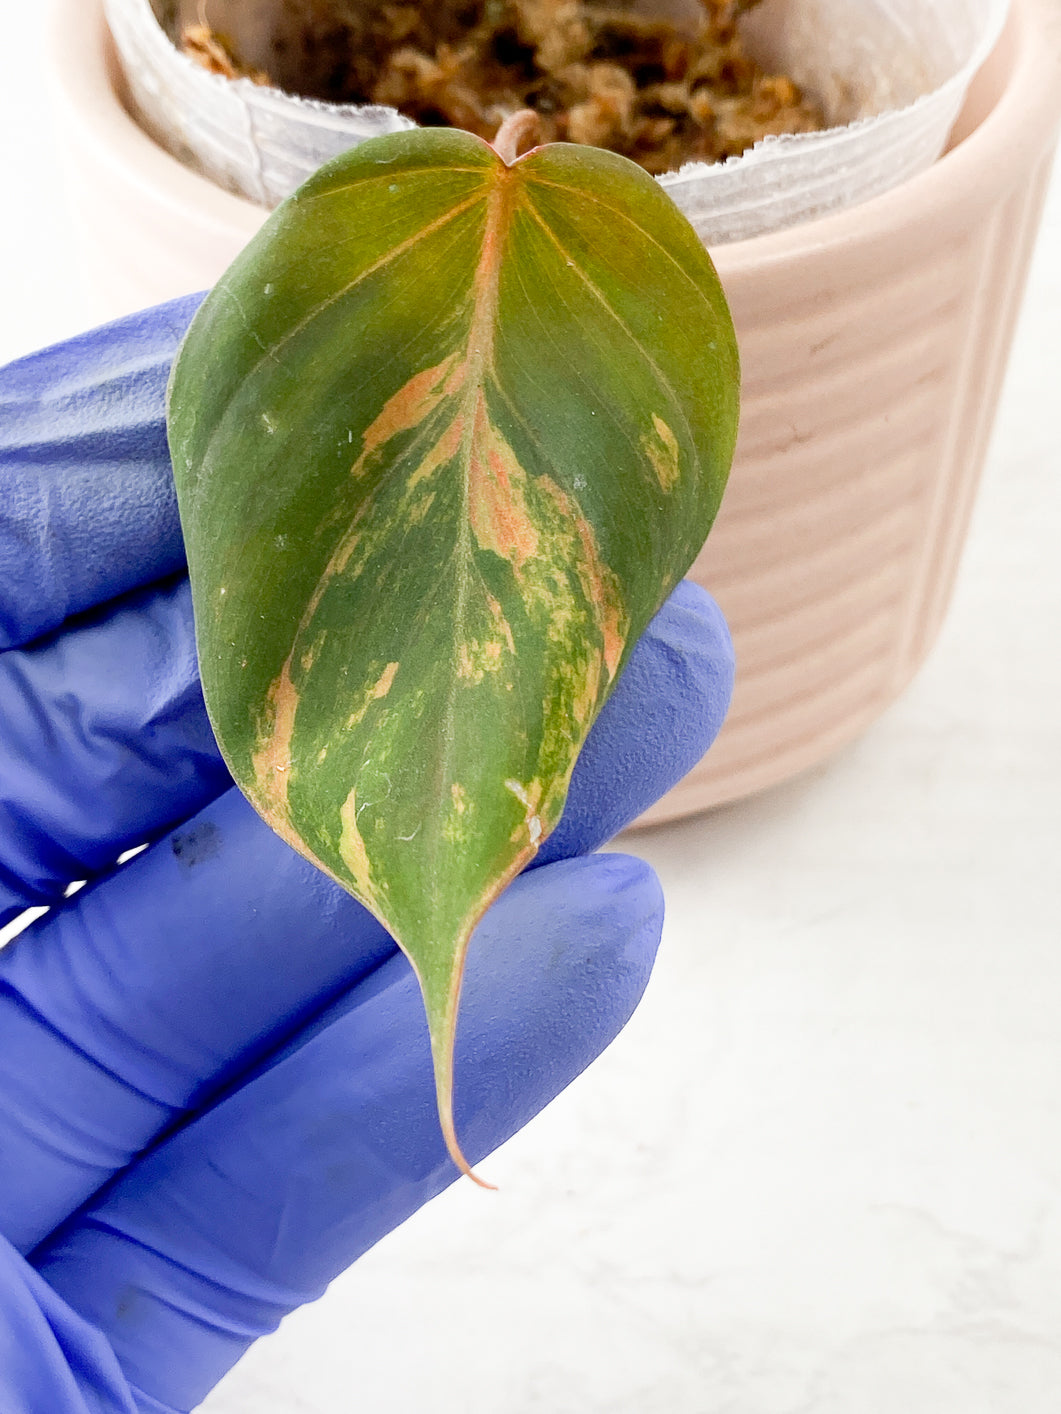 Philodendron  Micans variegated  Rooting 1 leaf